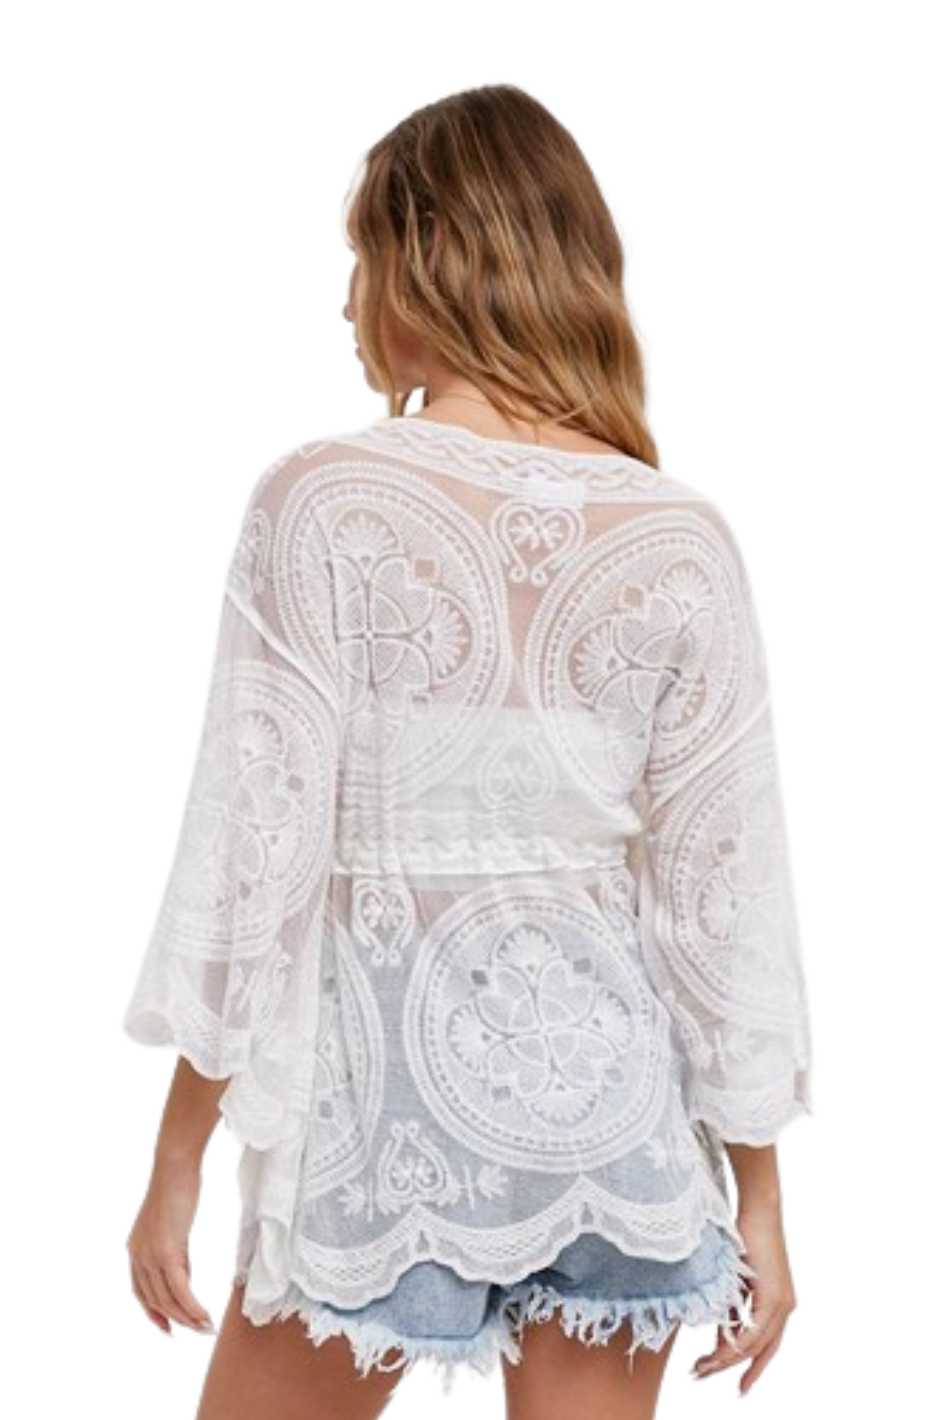 Boho Beauty Lace Cover Up Tunic - Expressive Collective CO.